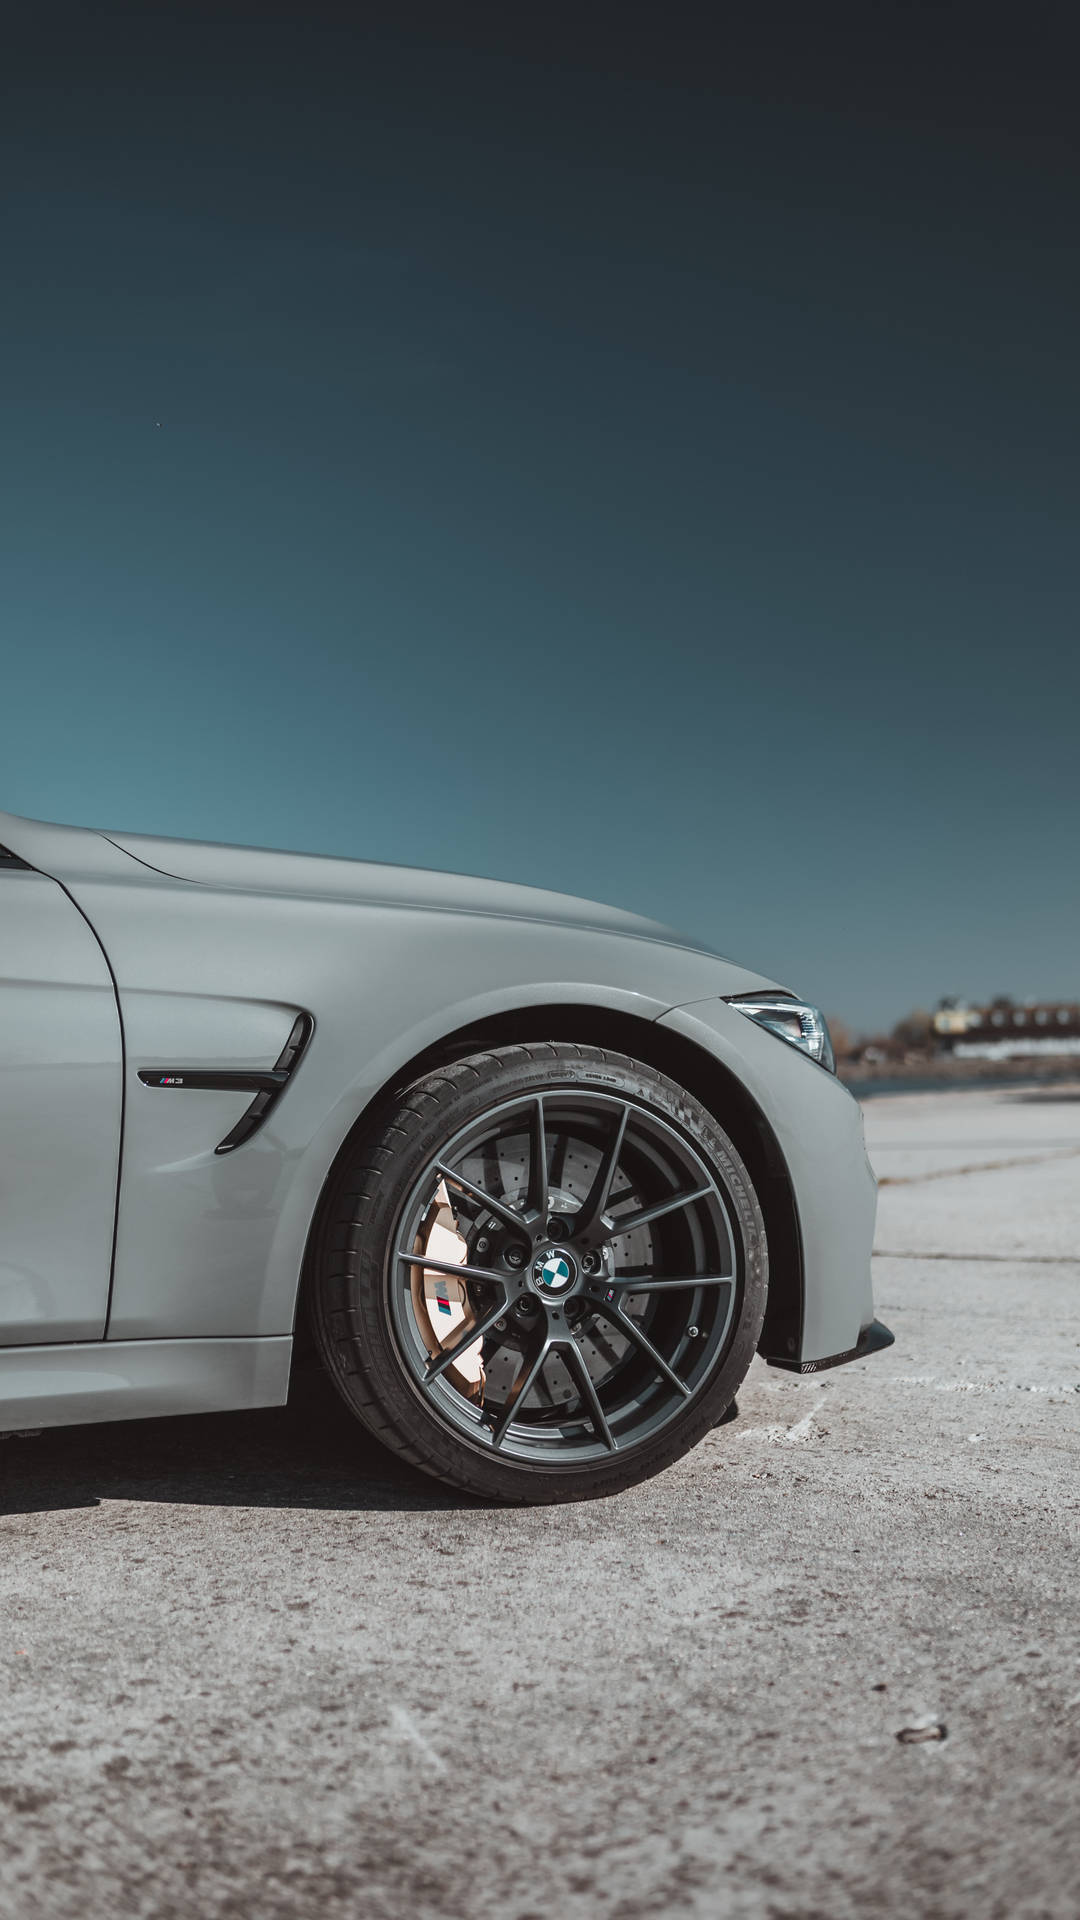 The Perfect View of a Gray BMW Car Wallpaper